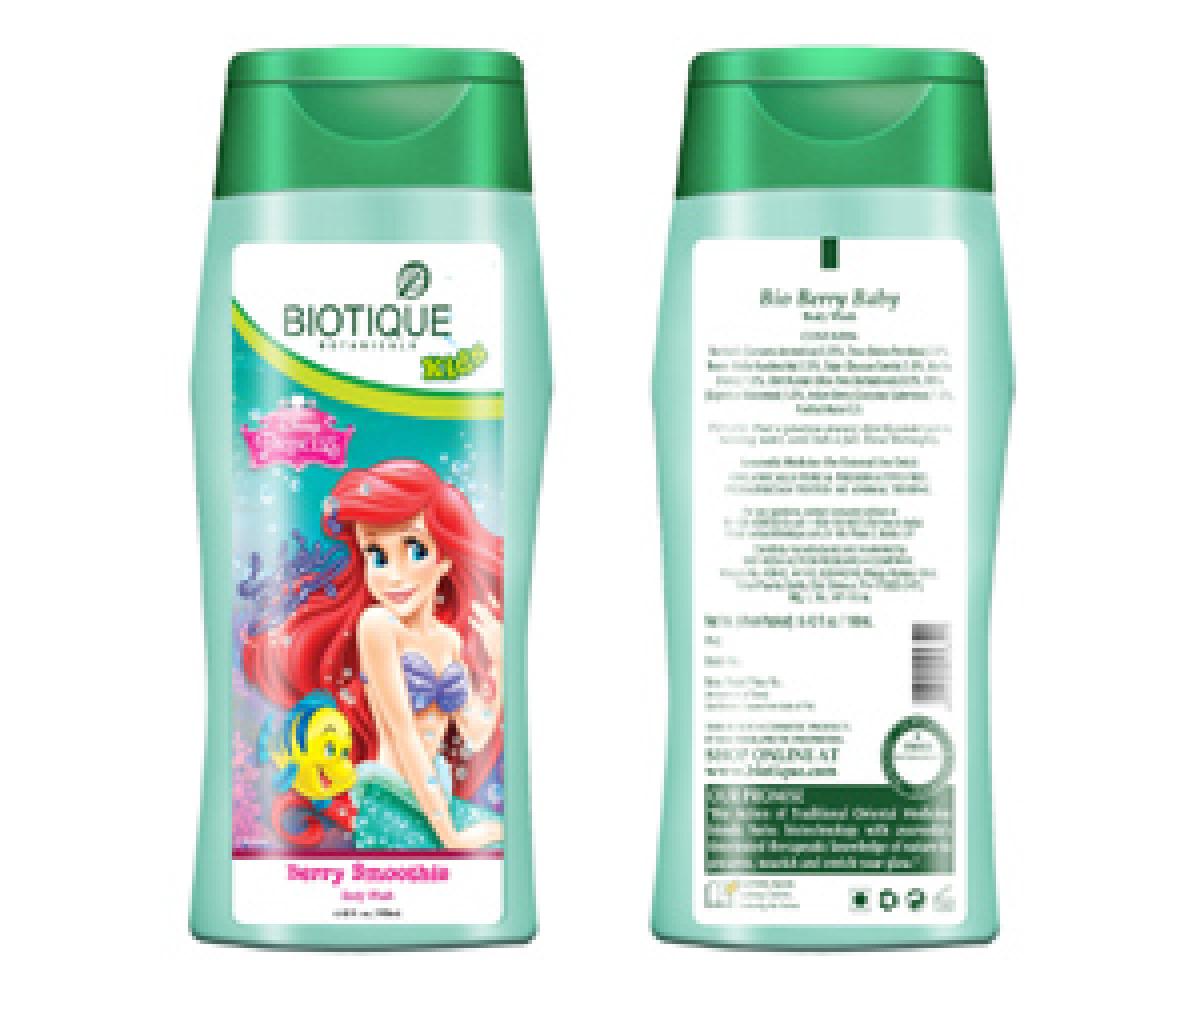 Biotique launches Disney characters’ inspired range 